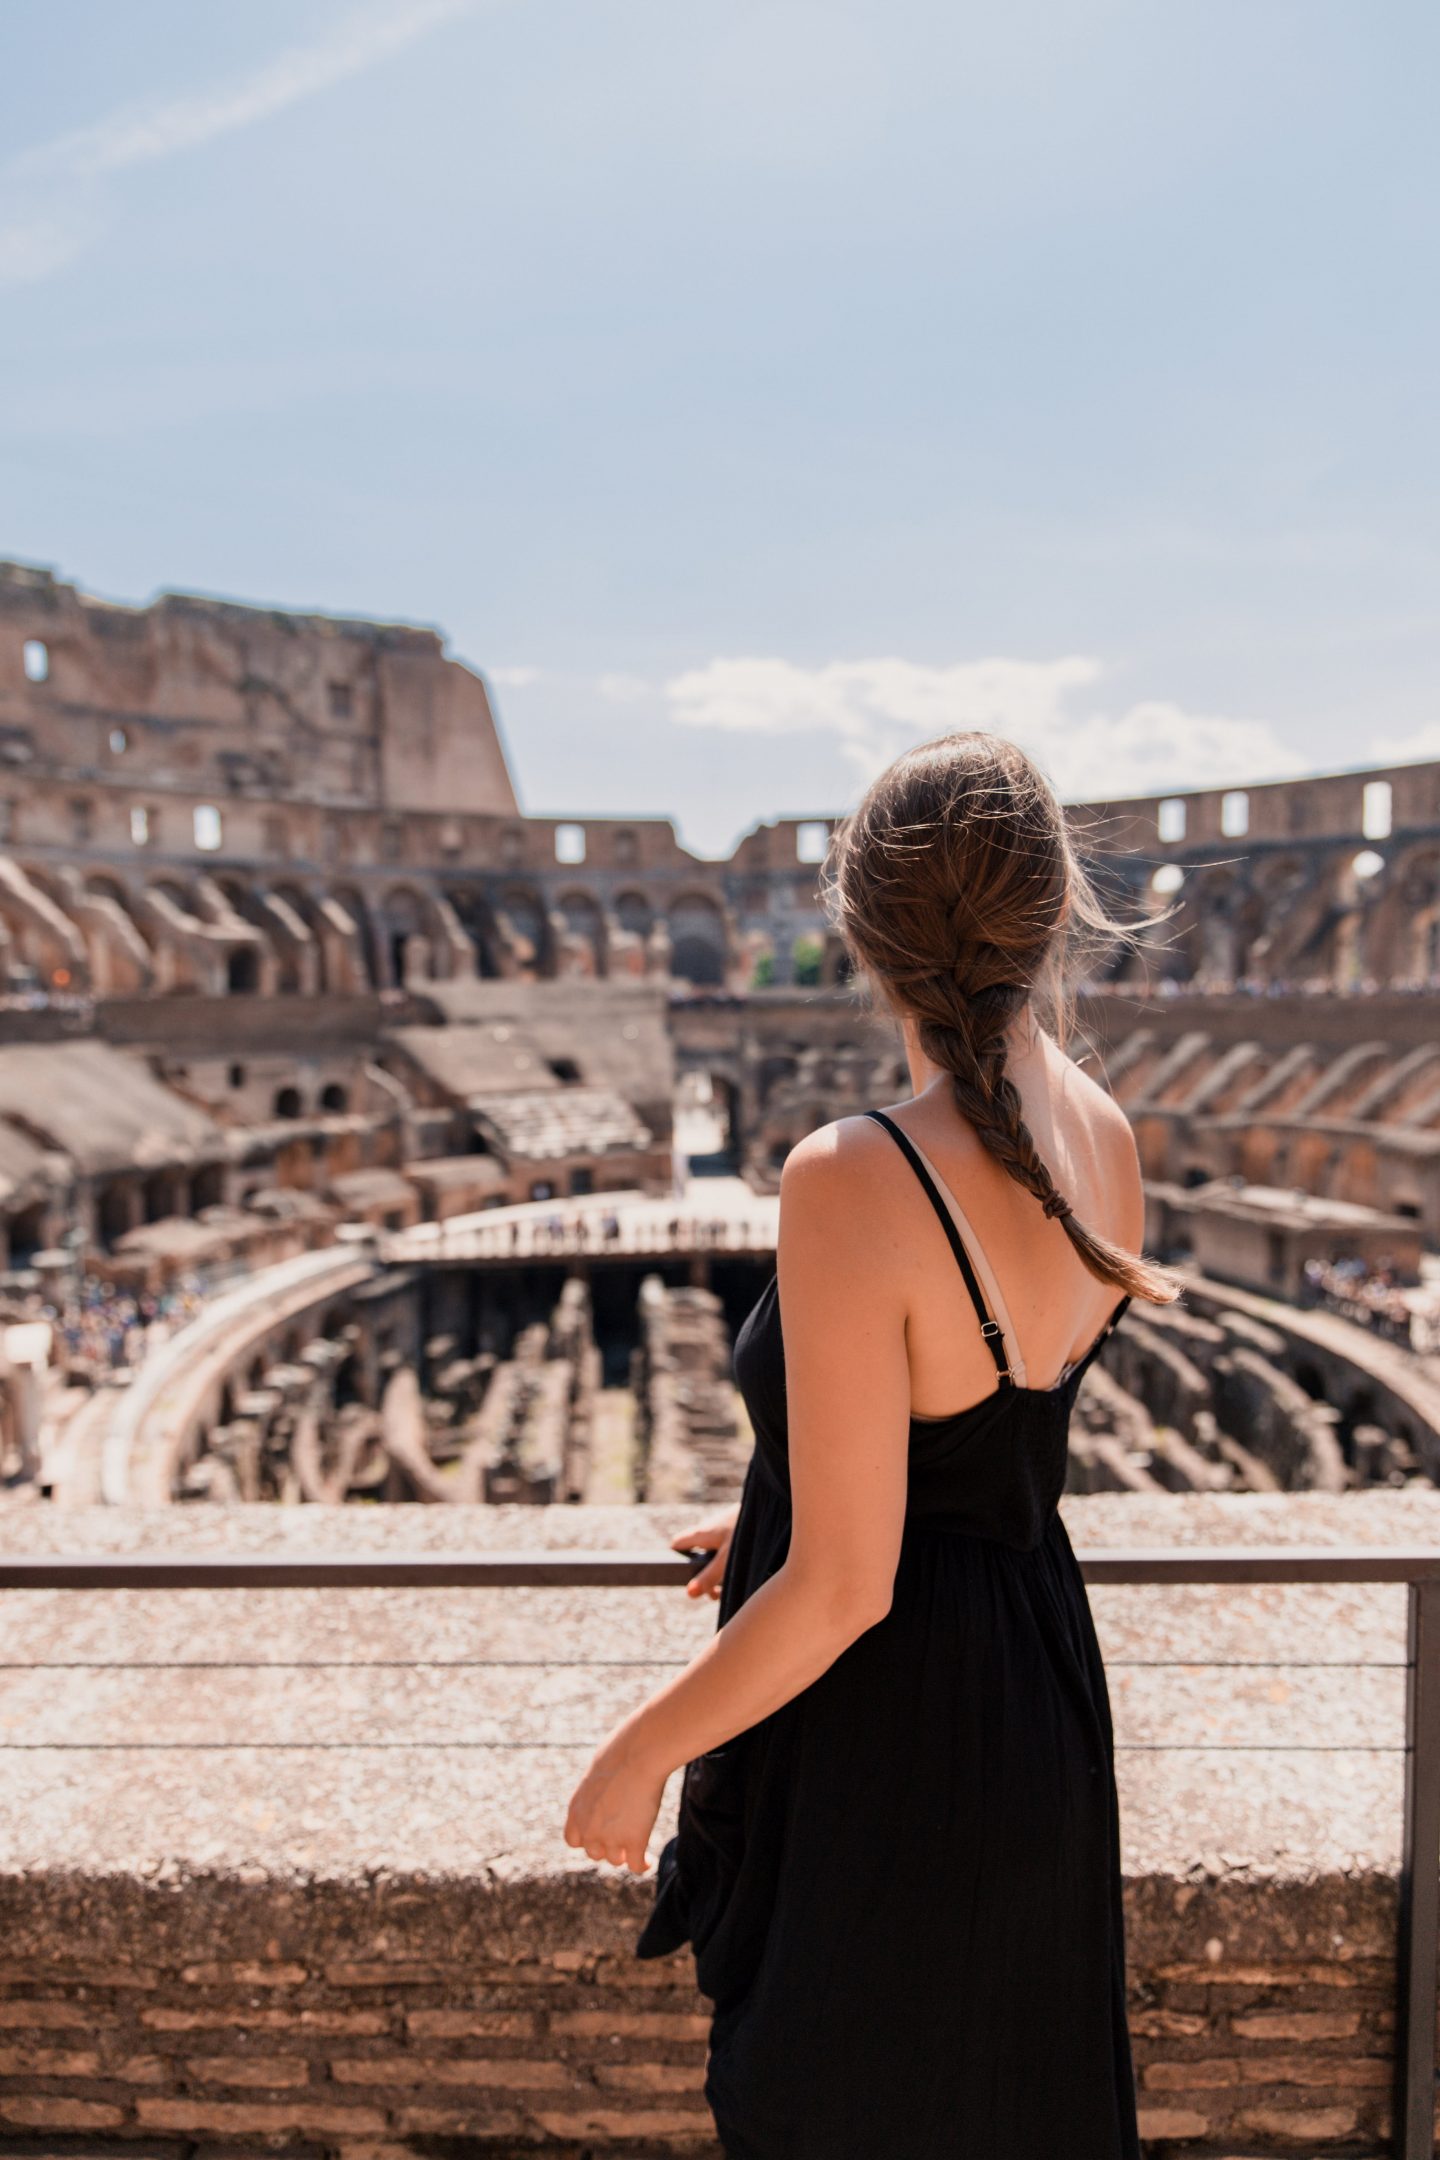 Visiting the Colosseum in Rome | How to Skip the Lines & Gain VIP Top Level Access